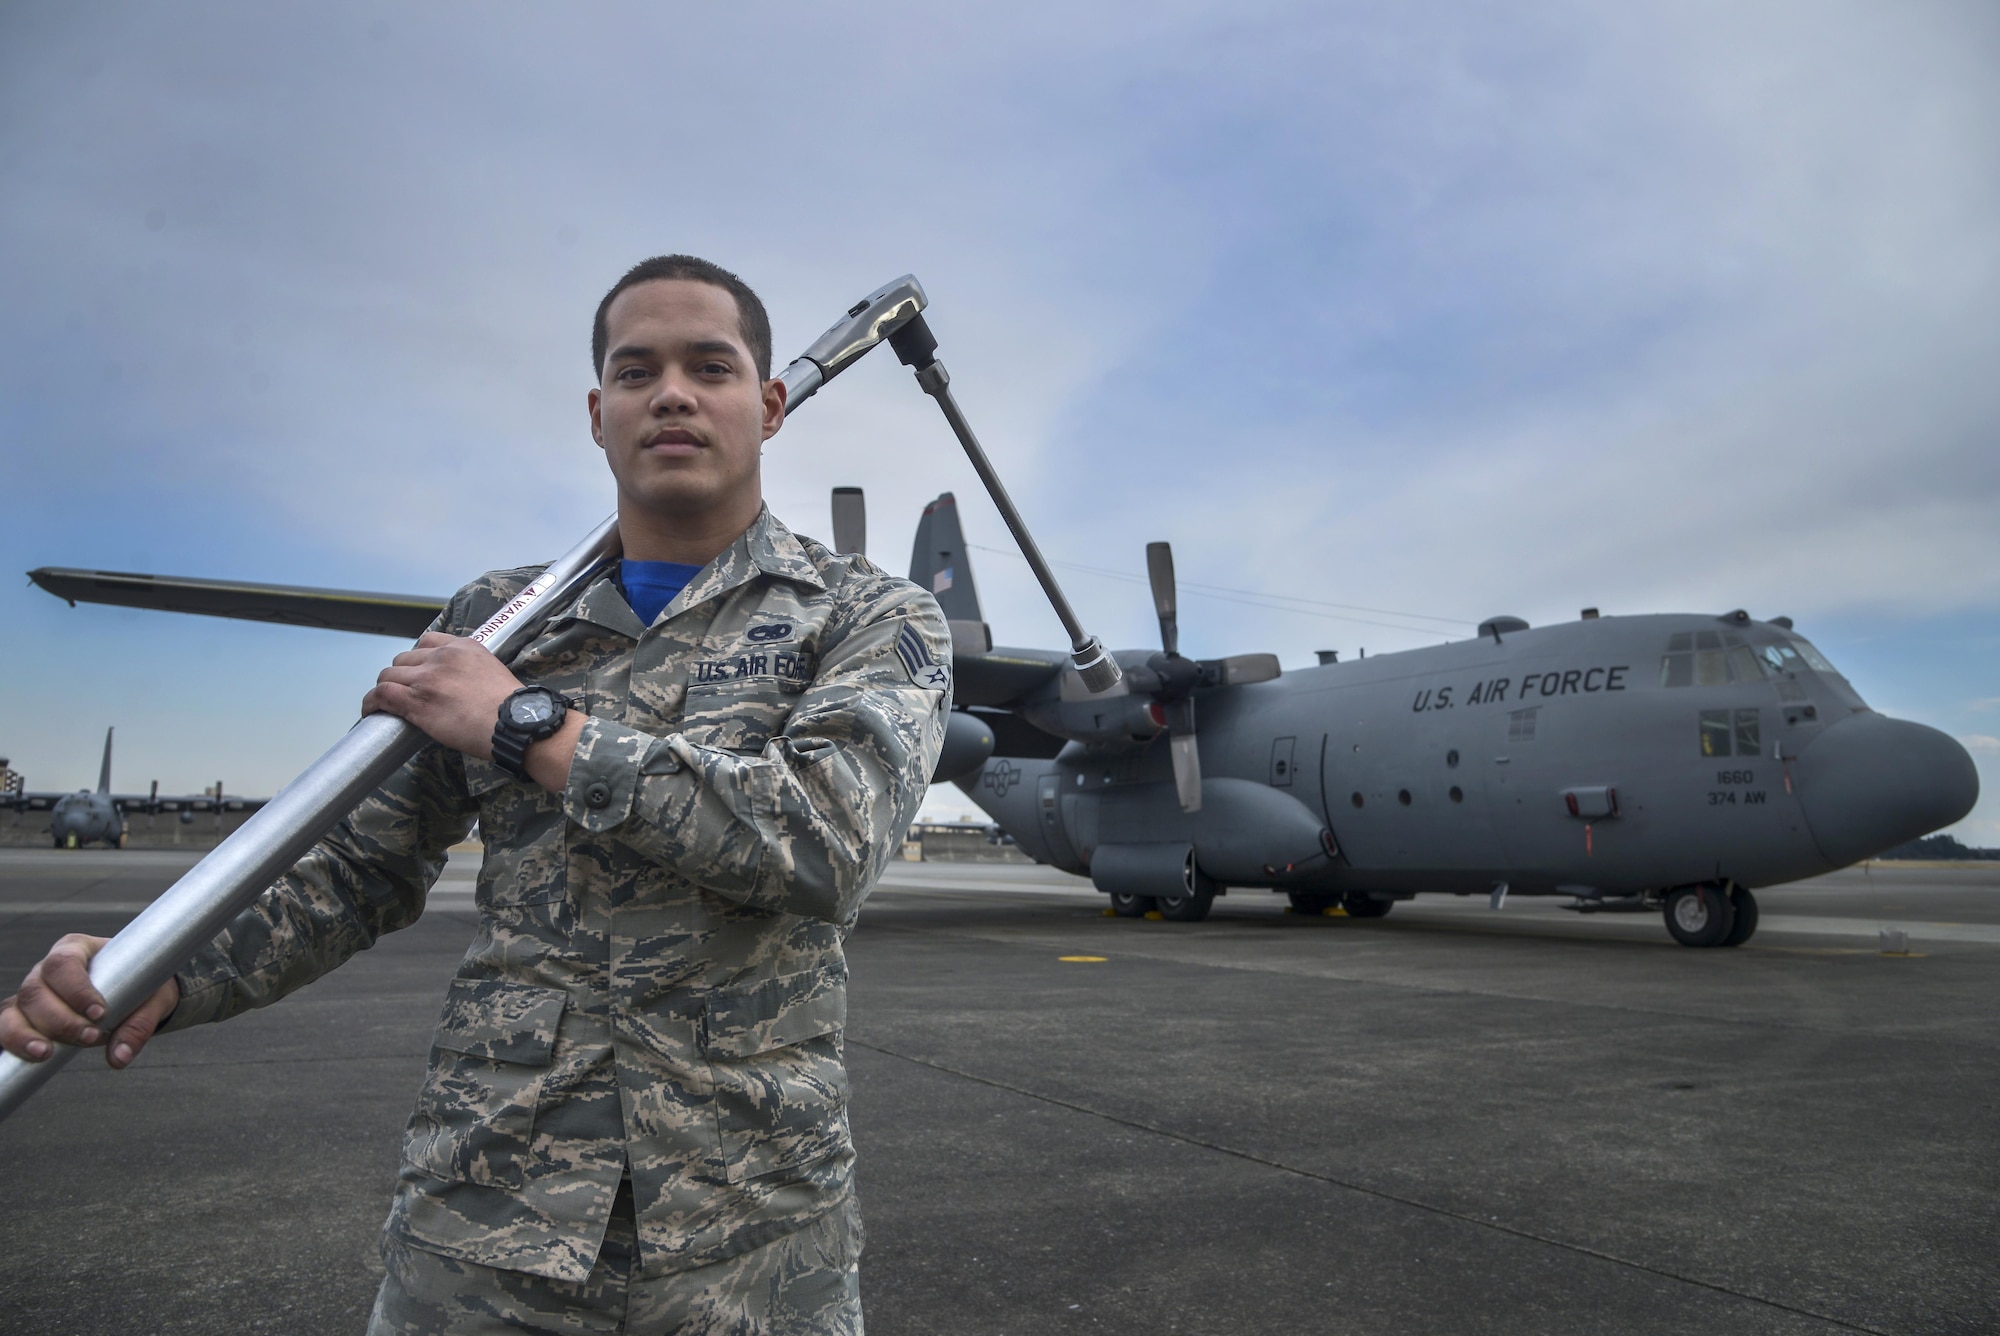 U.S. Air Force Senior Airman David Rivera, 374th Maintenance Flight aerospace propulsion journeyman, holds a torch wrench in front of a C-130 Hercules at Yokota Air Base, Japan, Feb. 26, 2016. Providing in depth maintenance on the aircraft ensures that Yokota’s mission of generating a professional airlift throughout the region is not impacted. (U.S. Air Force photo by Senior Airman David Owsianka/Released)